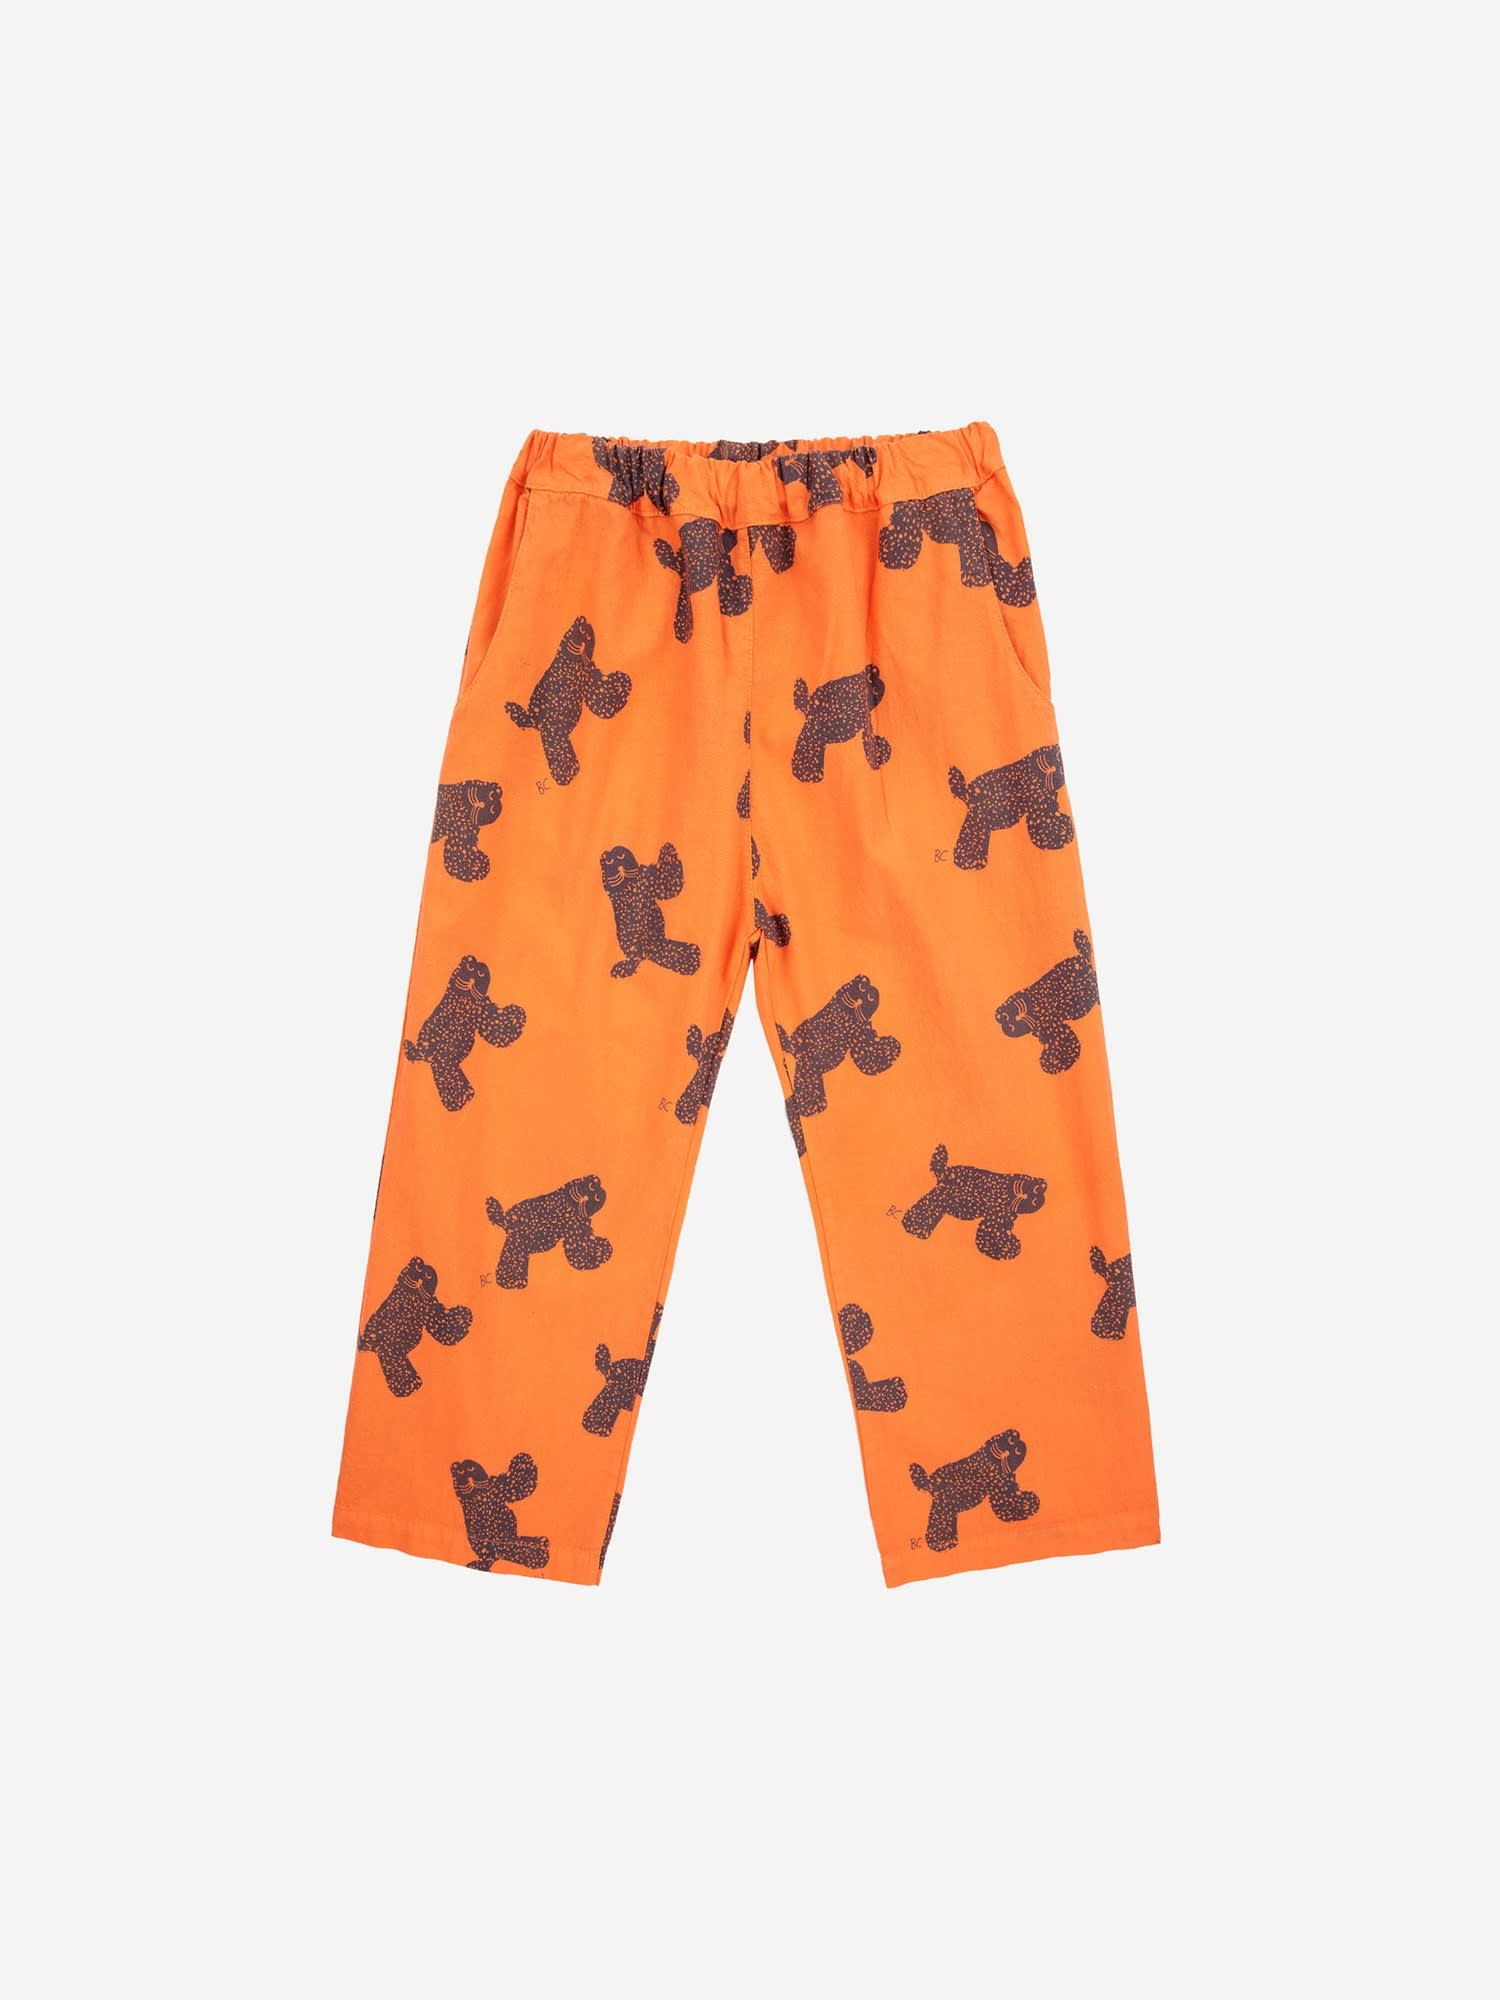 Bobo Choses Orange Trousers For Kids With All-over Cheetah Pattern